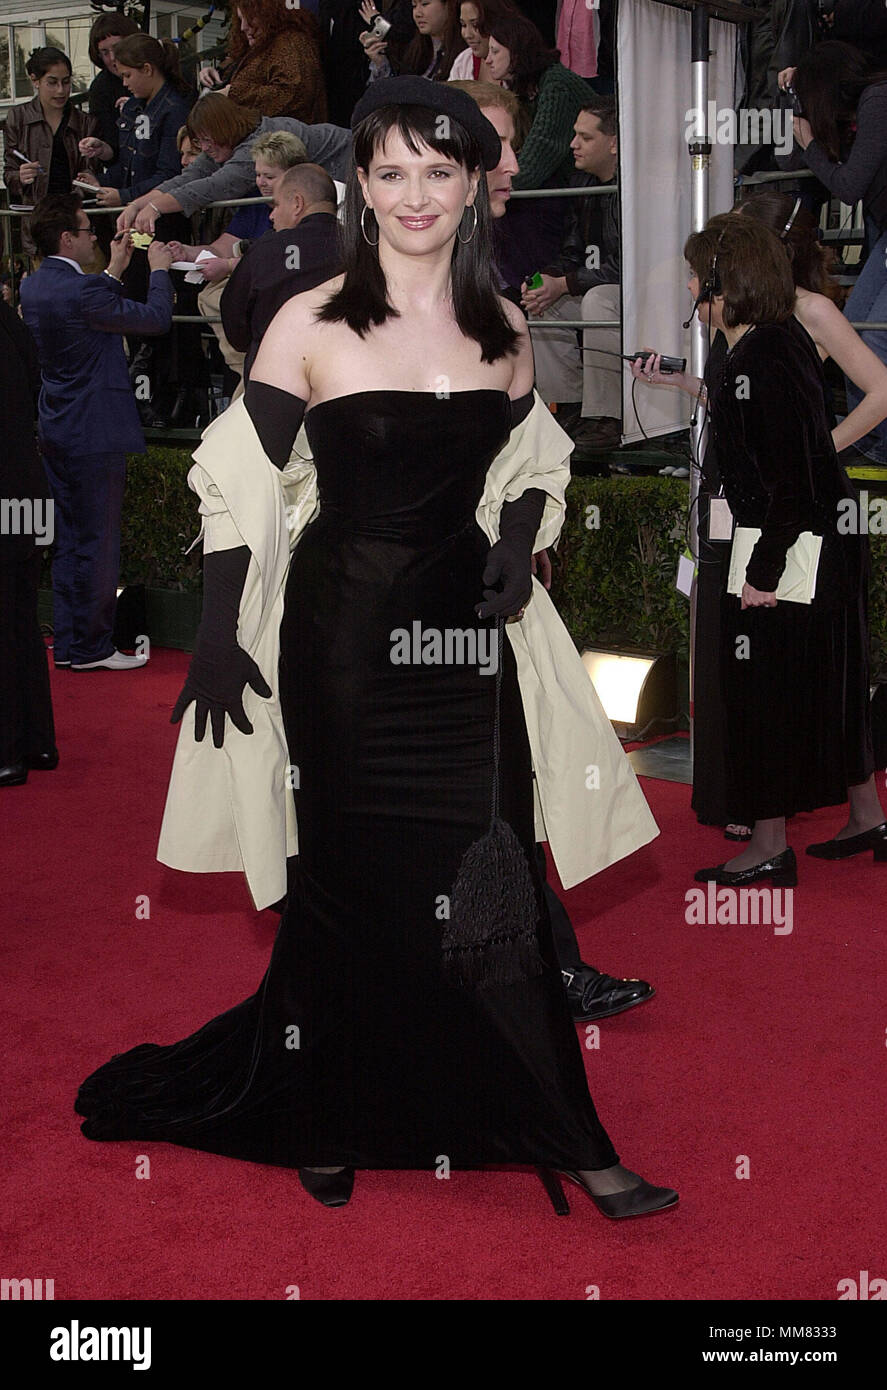 Juliette Binoche  arriving at the SAG Awards, at the Shrine Auditorium in Los Angeles  3/11/01    BinocheJuliette01A.JPGBinocheJuliette01A Red Carpet Event, Vertical, USA, Film Industry, Celebrities,  Photography, Bestof, Arts Culture and Entertainment, Topix Celebrities fashion /  Vertical, Best of, Event in Hollywood Life - California,  Red Carpet and backstage, USA, Film Industry, Celebrities,  movie celebrities, TV celebrities, Music celebrities, Photography, Bestof, Arts Culture and Entertainment,  Topix, vertical, one person,, from the year , 2001, inquiry tsuni@Gamma-USA.com Fashion - F Stock Photo